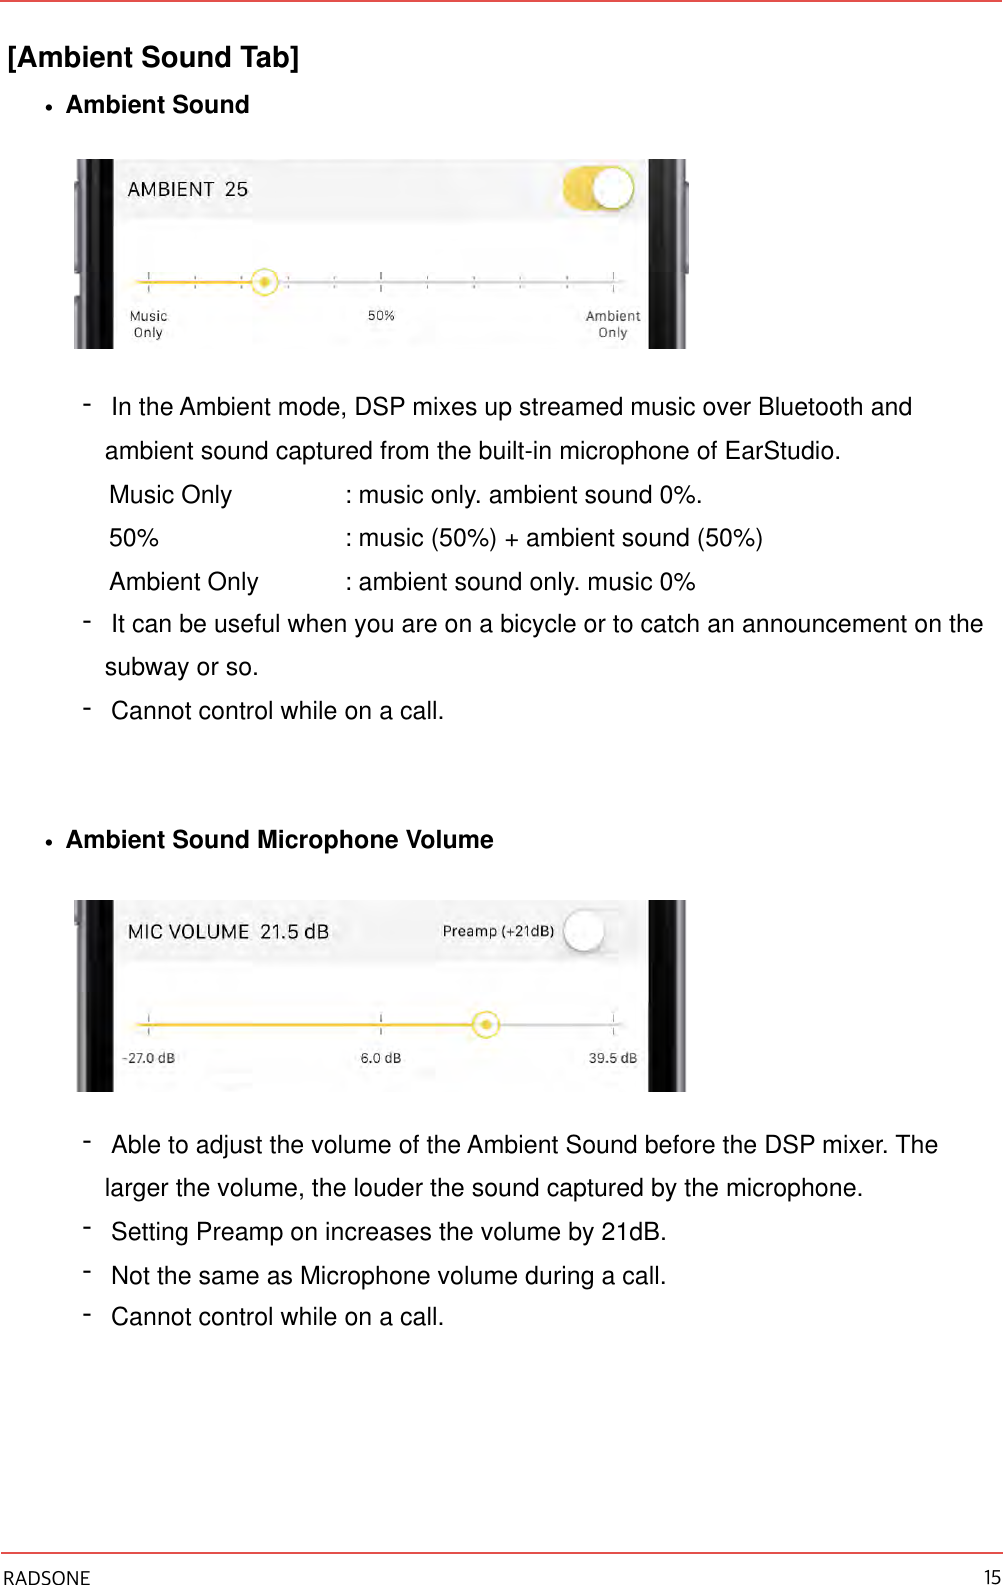 [Ambient Sound Tab] •Ambient Sound -In the Ambient mode, DSP mixes up streamed music over Bluetooth and ambient sound captured from the built-in microphone of EarStudio. Music Only  : music only. ambient sound 0%. 50%    : music (50%) + ambient sound (50%) Ambient Only  : ambient sound only. music 0% -It can be useful when you are on a bicycle or to catch an announcement on the subway or so. -Cannot control while on a call. •Ambient Sound Microphone Volume -Able to adjust the volume of the Ambient Sound before the DSP mixer. The larger the volume, the louder the sound captured by the microphone. -Setting Preamp on increases the volume by 21dB. -Not the same as Microphone volume during a call. -Cannot control while on a call.!RADSONE 15